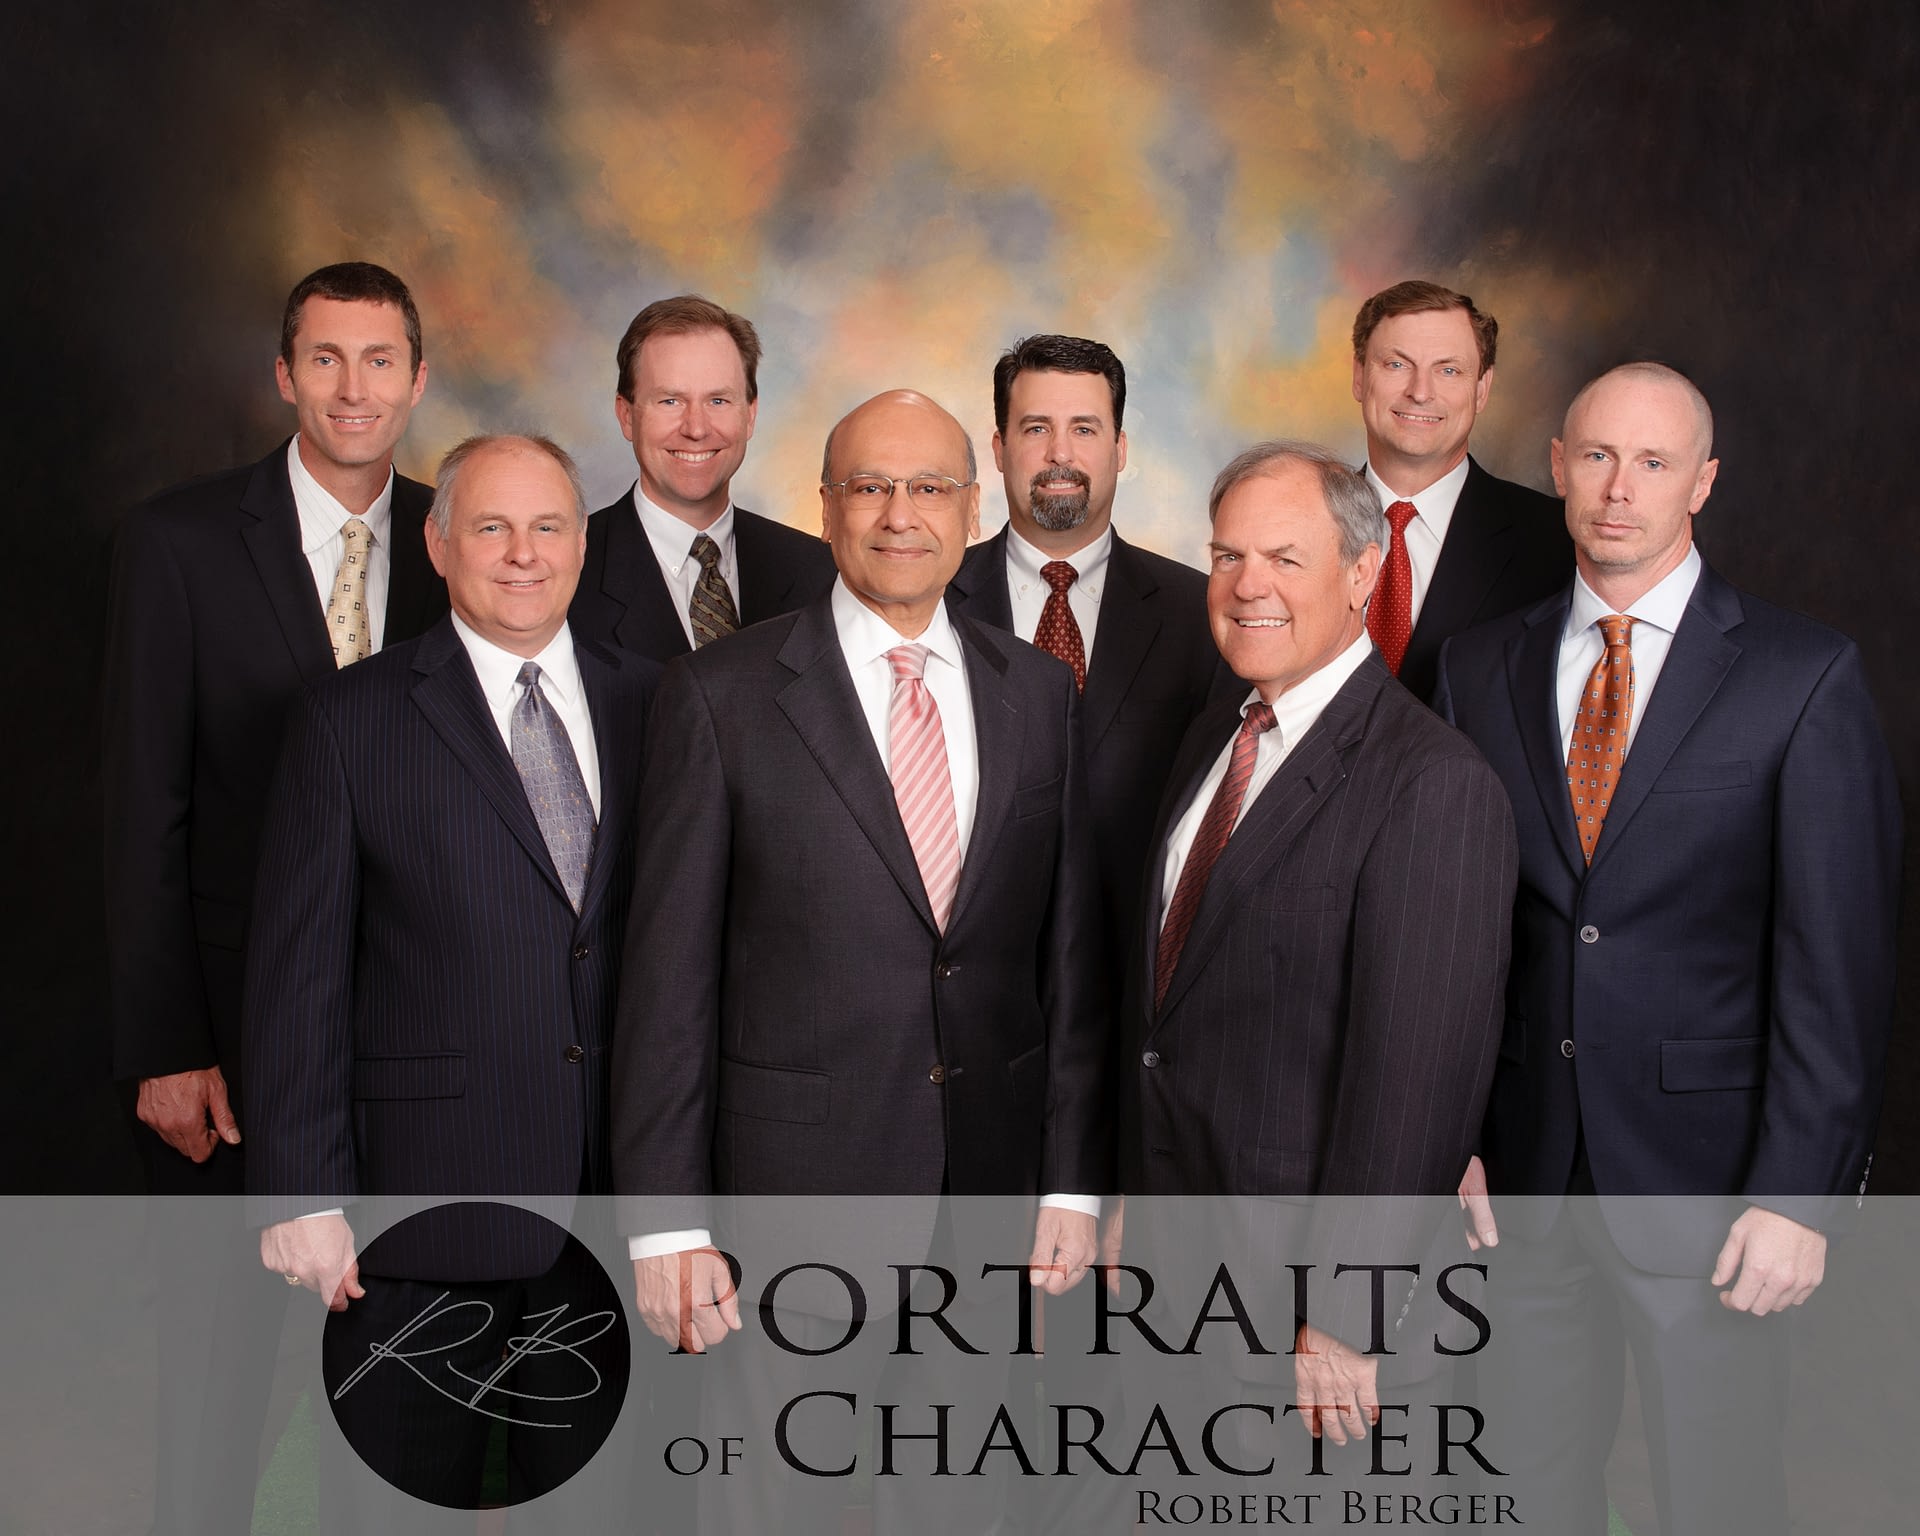 Houston Group Photography, Group Pictures & Portraits for Company, Business, Family, Executive, Corporate Website, Photo Christmas Cards/Portraits of Character by Robert Berger Professional Photographer